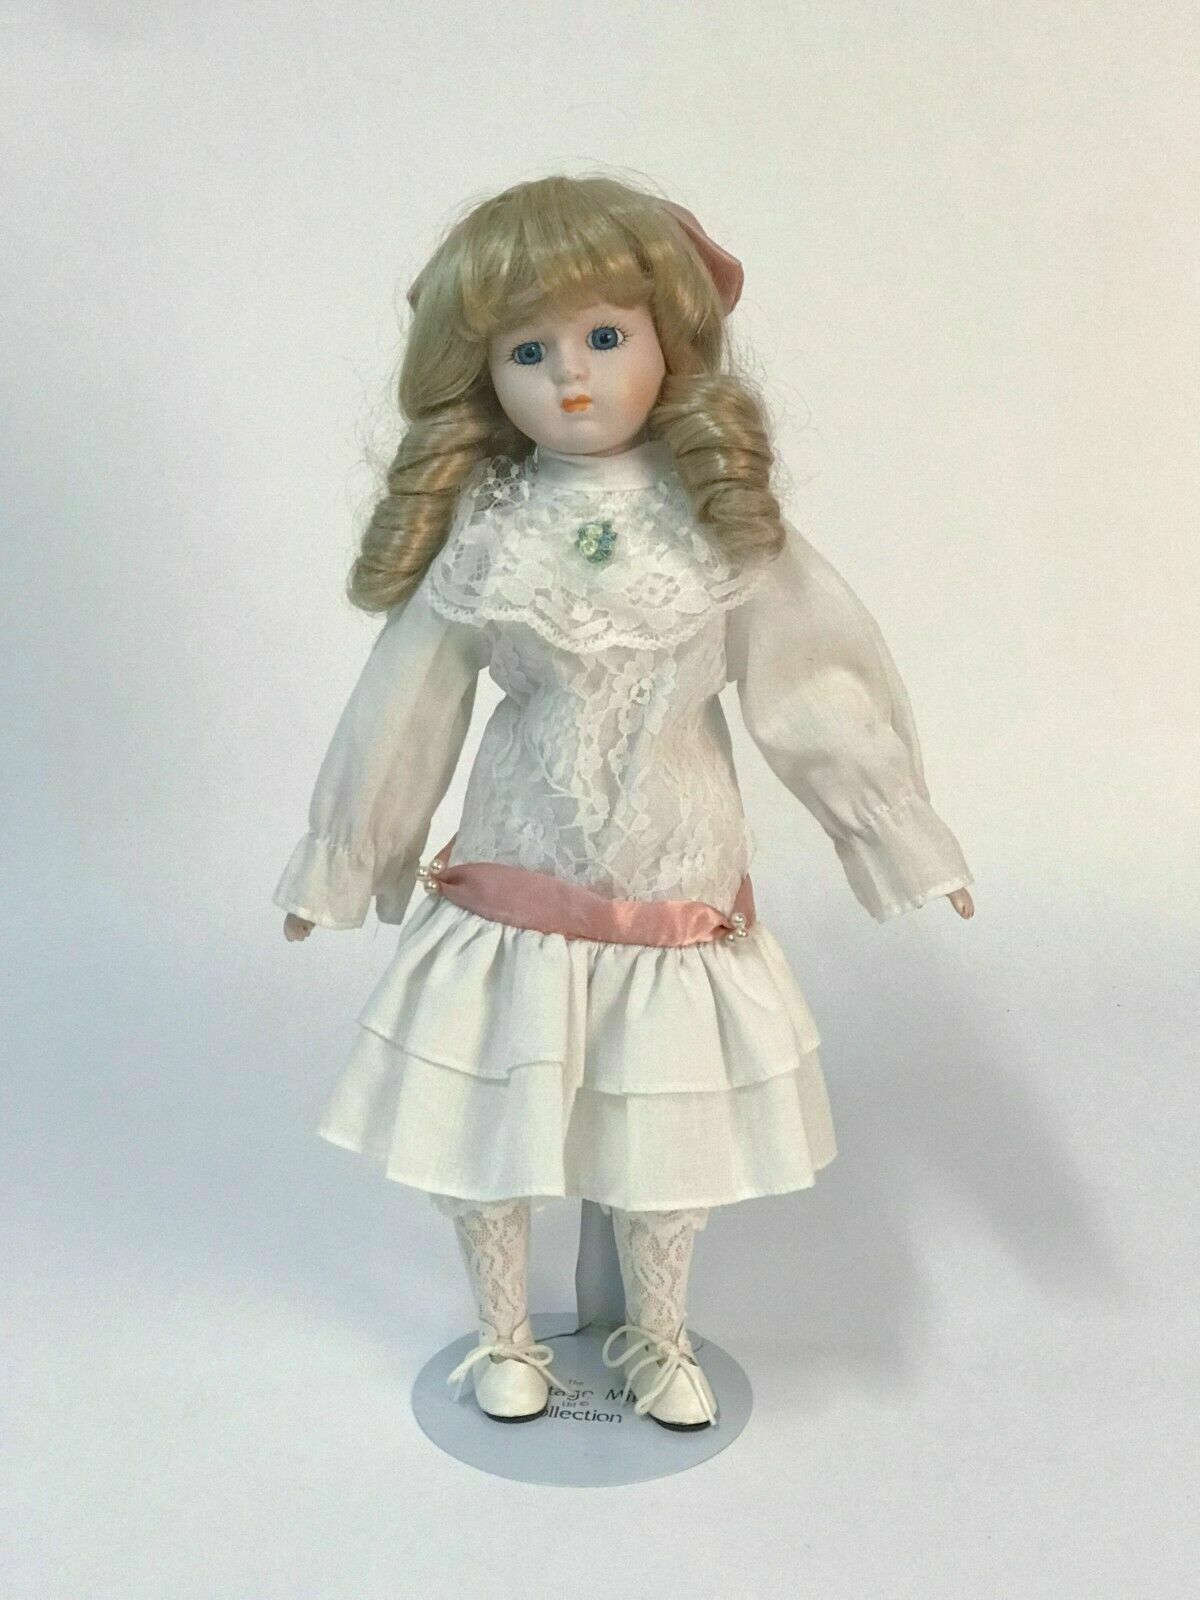 Heritage Mint Collection Limited Edition, Victorian Porcelain Doll